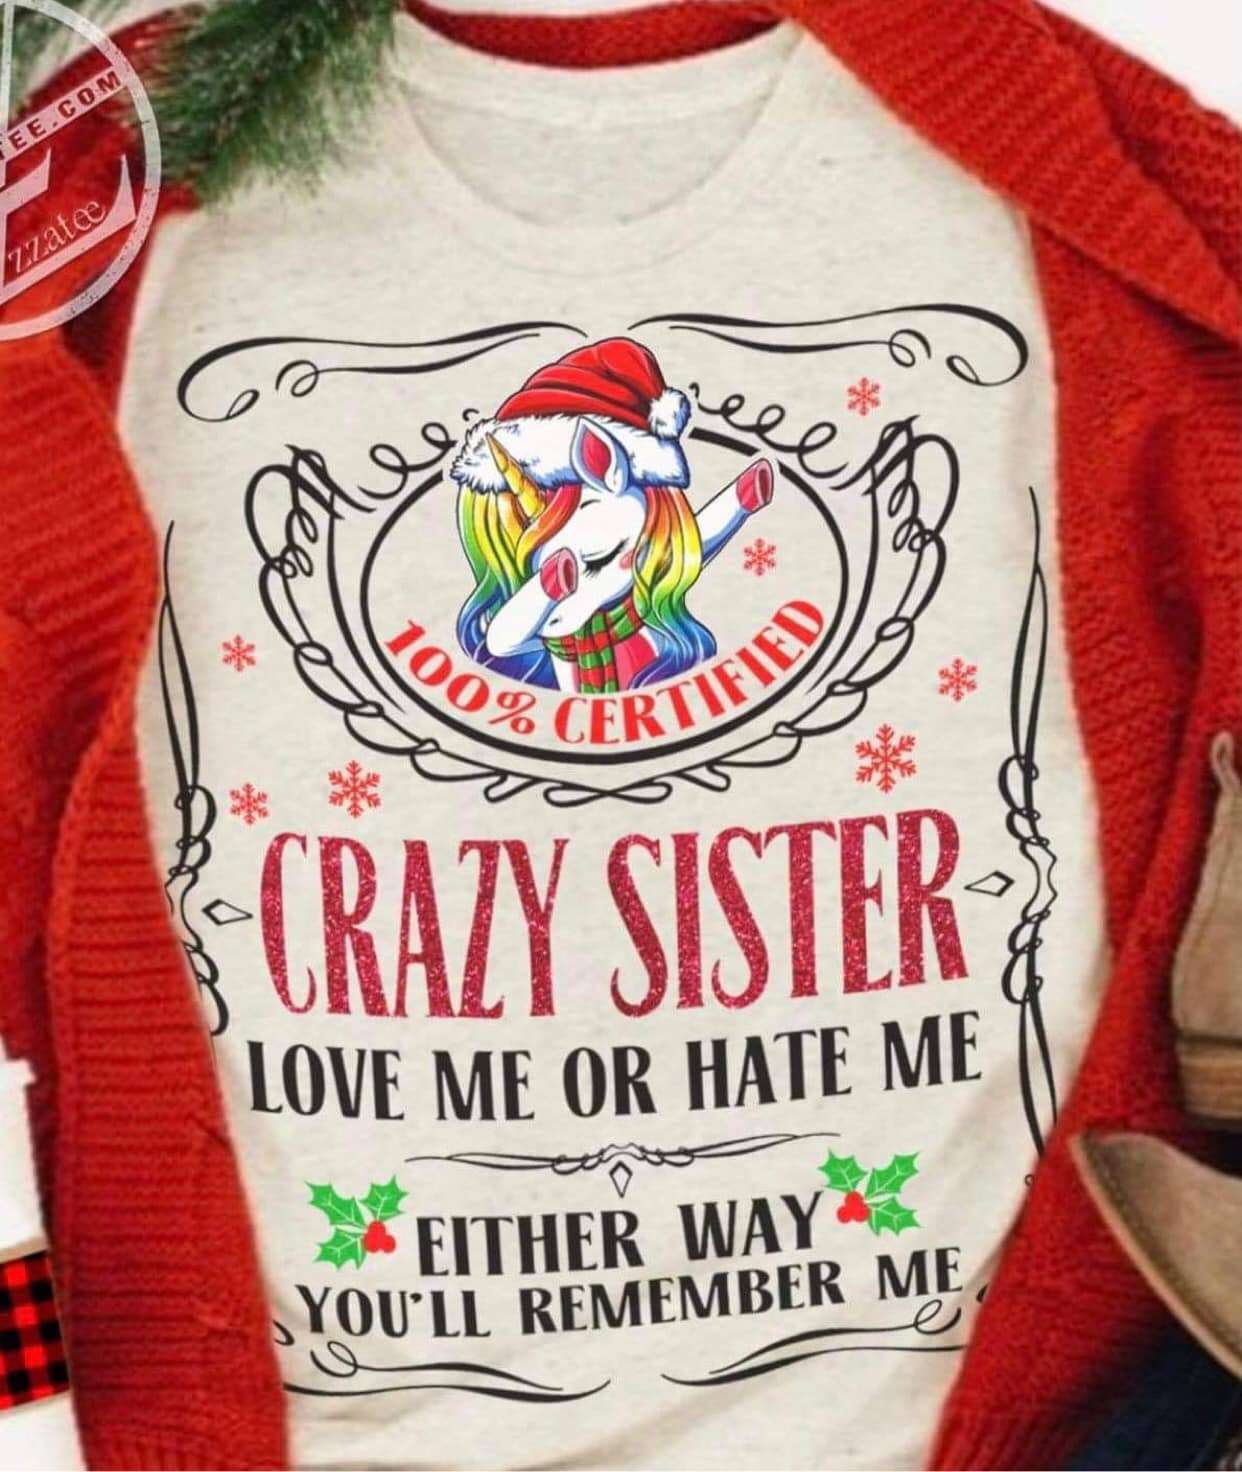 Unicorn Sister, Gift For Unicorn lover - 100% certified crazy sister love me or hate me either way you'll remember me